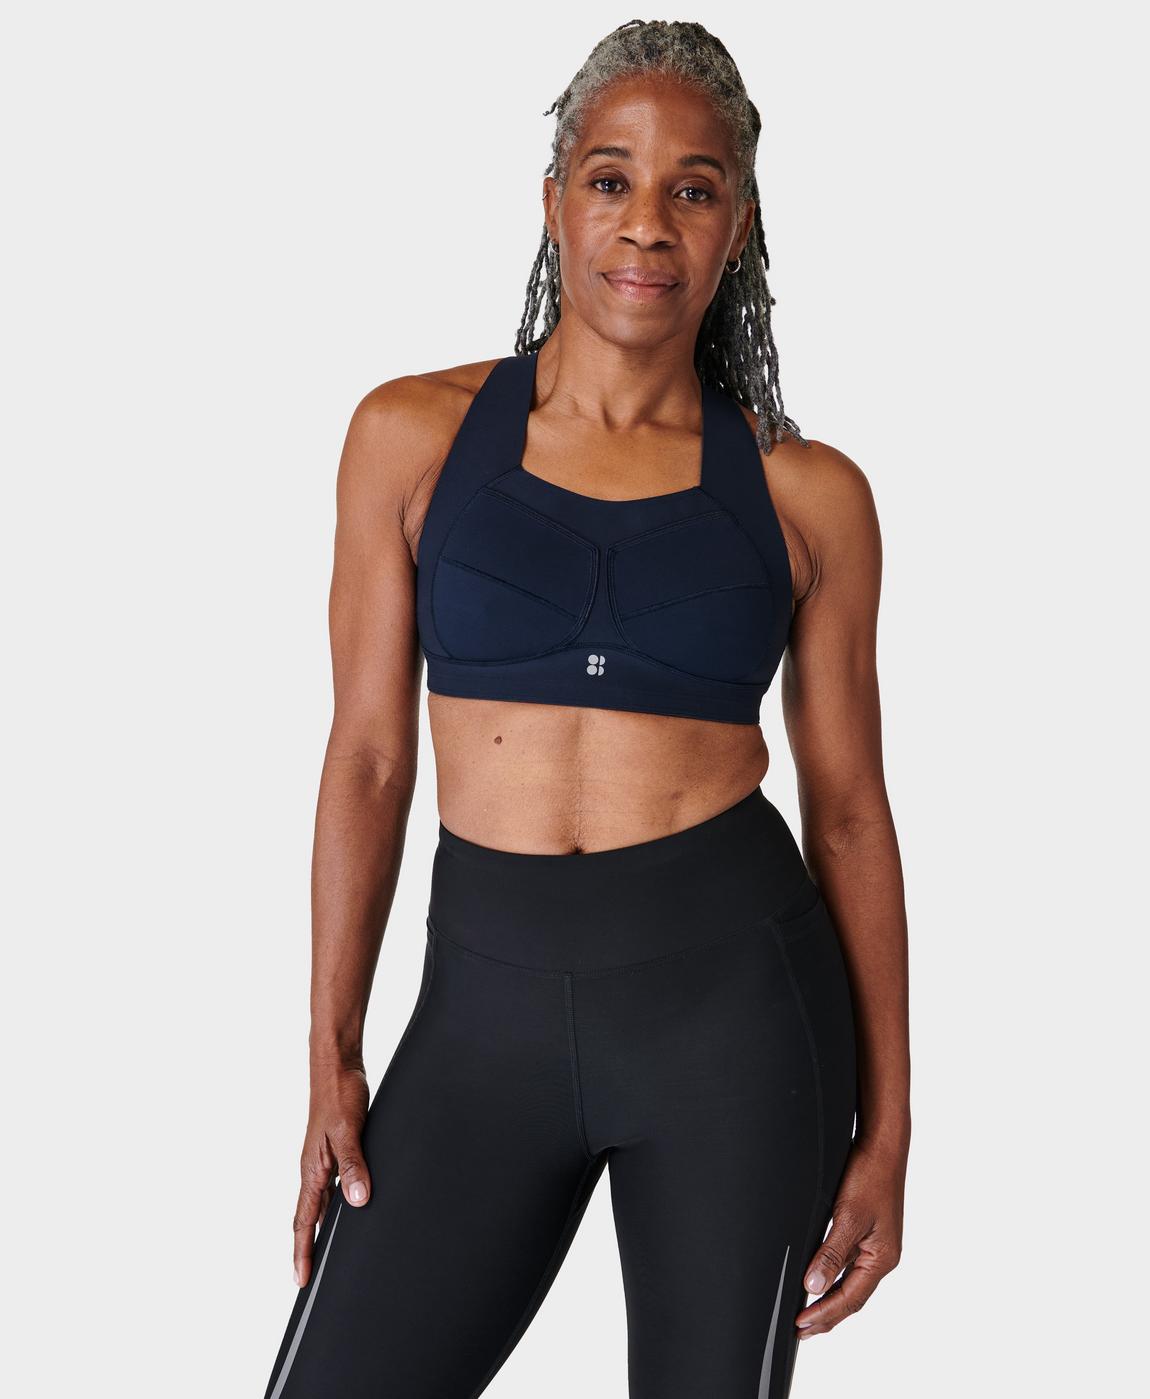 Women's sports bra for every size